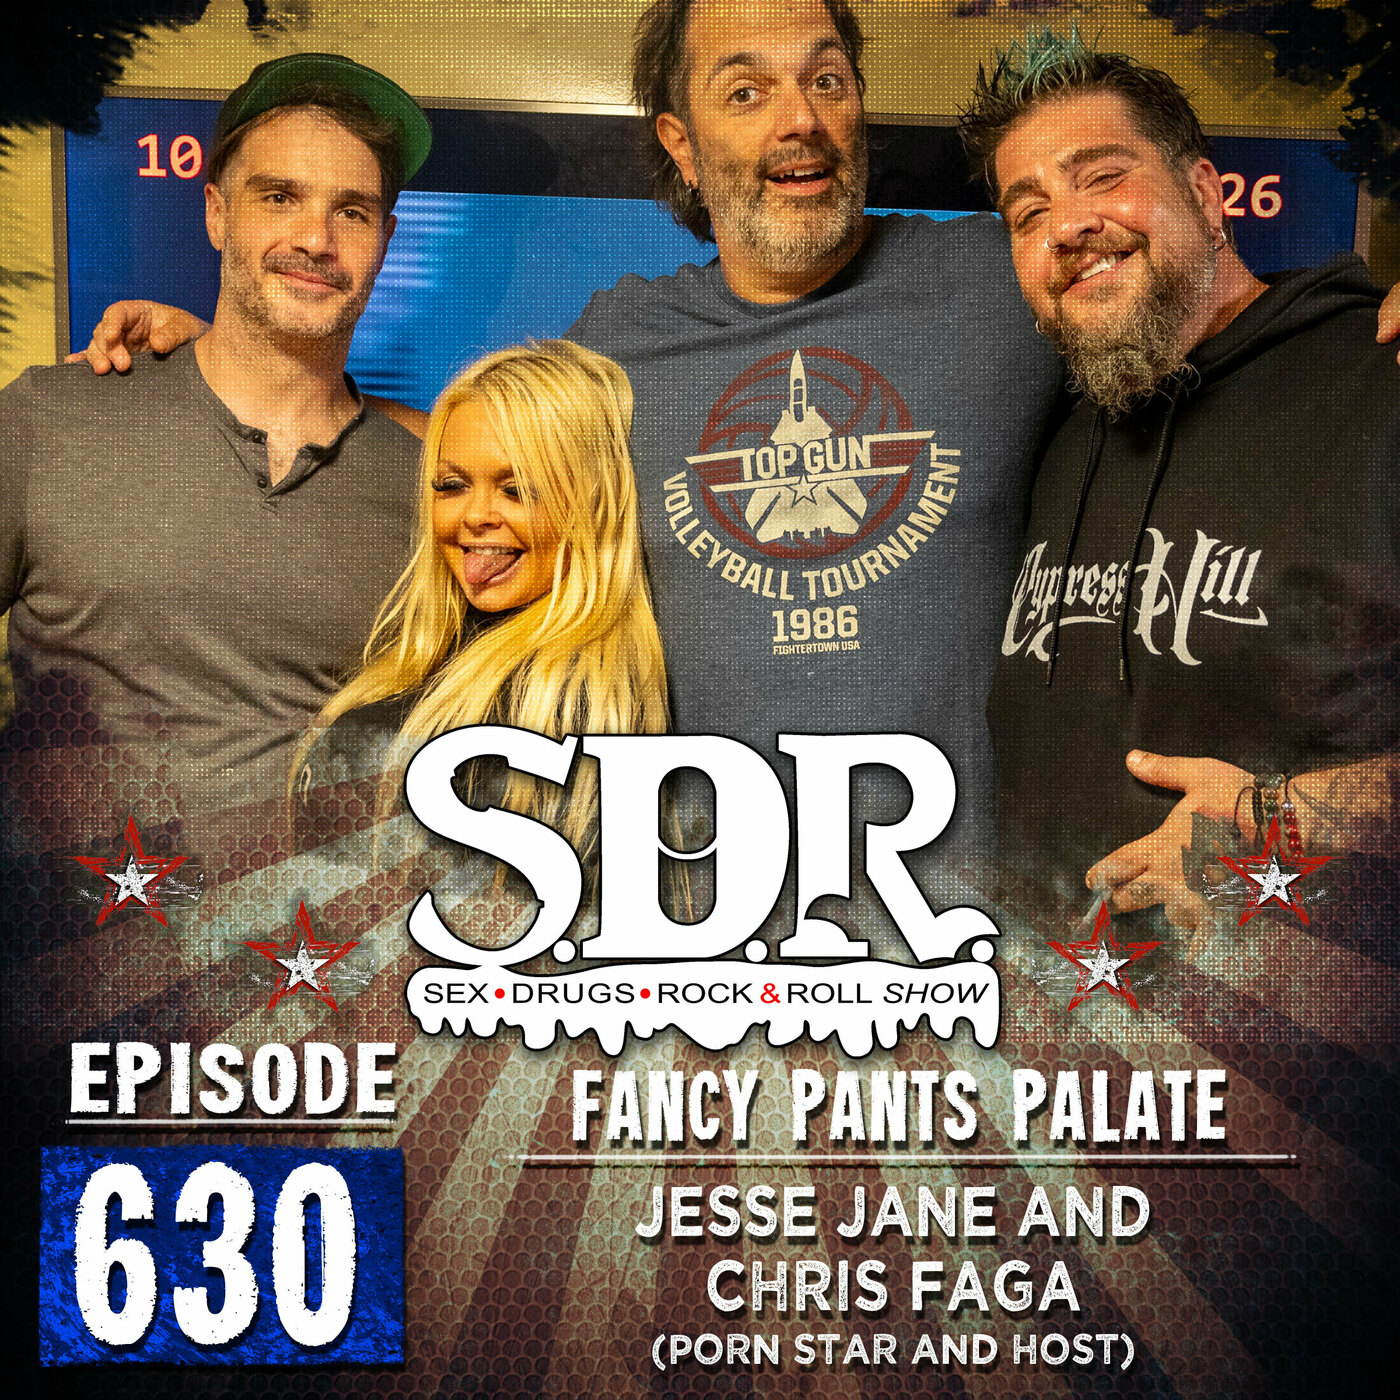 Jesse Jane Porn - Jesse Jane And Chris Faga (Porn Star And Host) - Fancy Pants Palate by The  SDR Show (Sex, Drugs, & Rock-n-Roll Show) w/Ralph Sutton & Big Jay Oakerson  | Podchaser